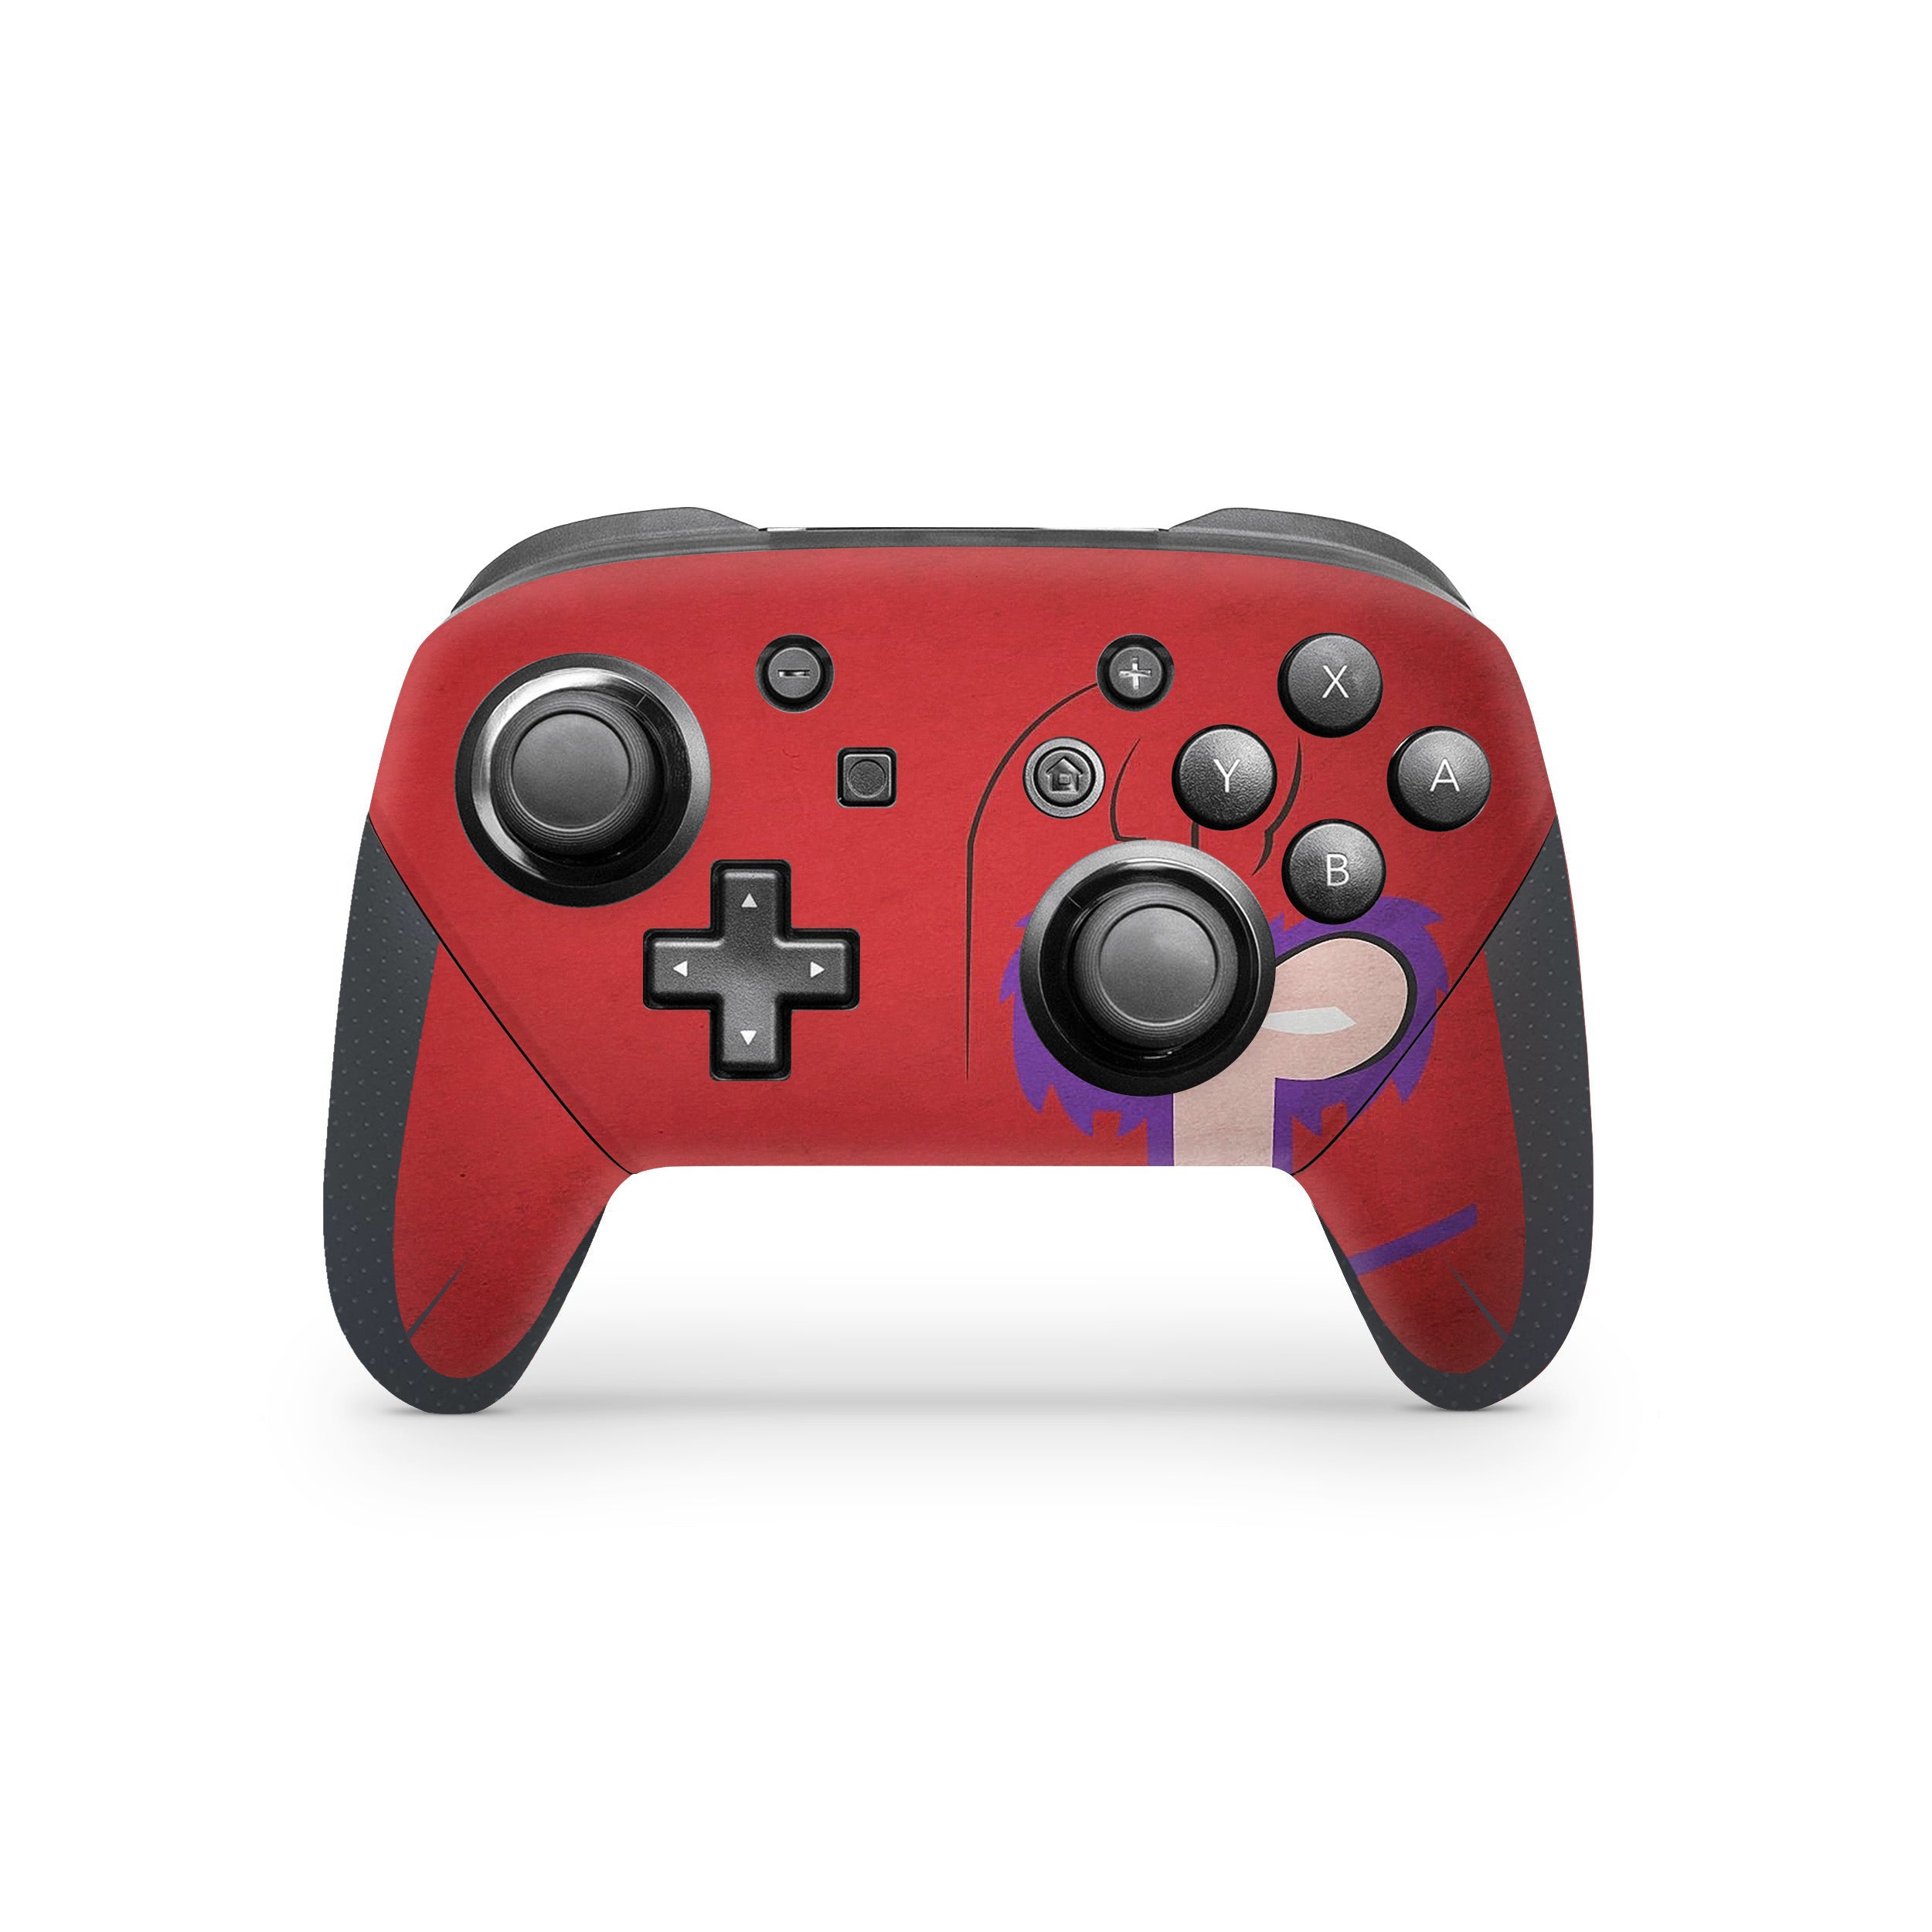 A video game skin featuring a Marvel X Men Magneto design for the Switch Pro Controller.